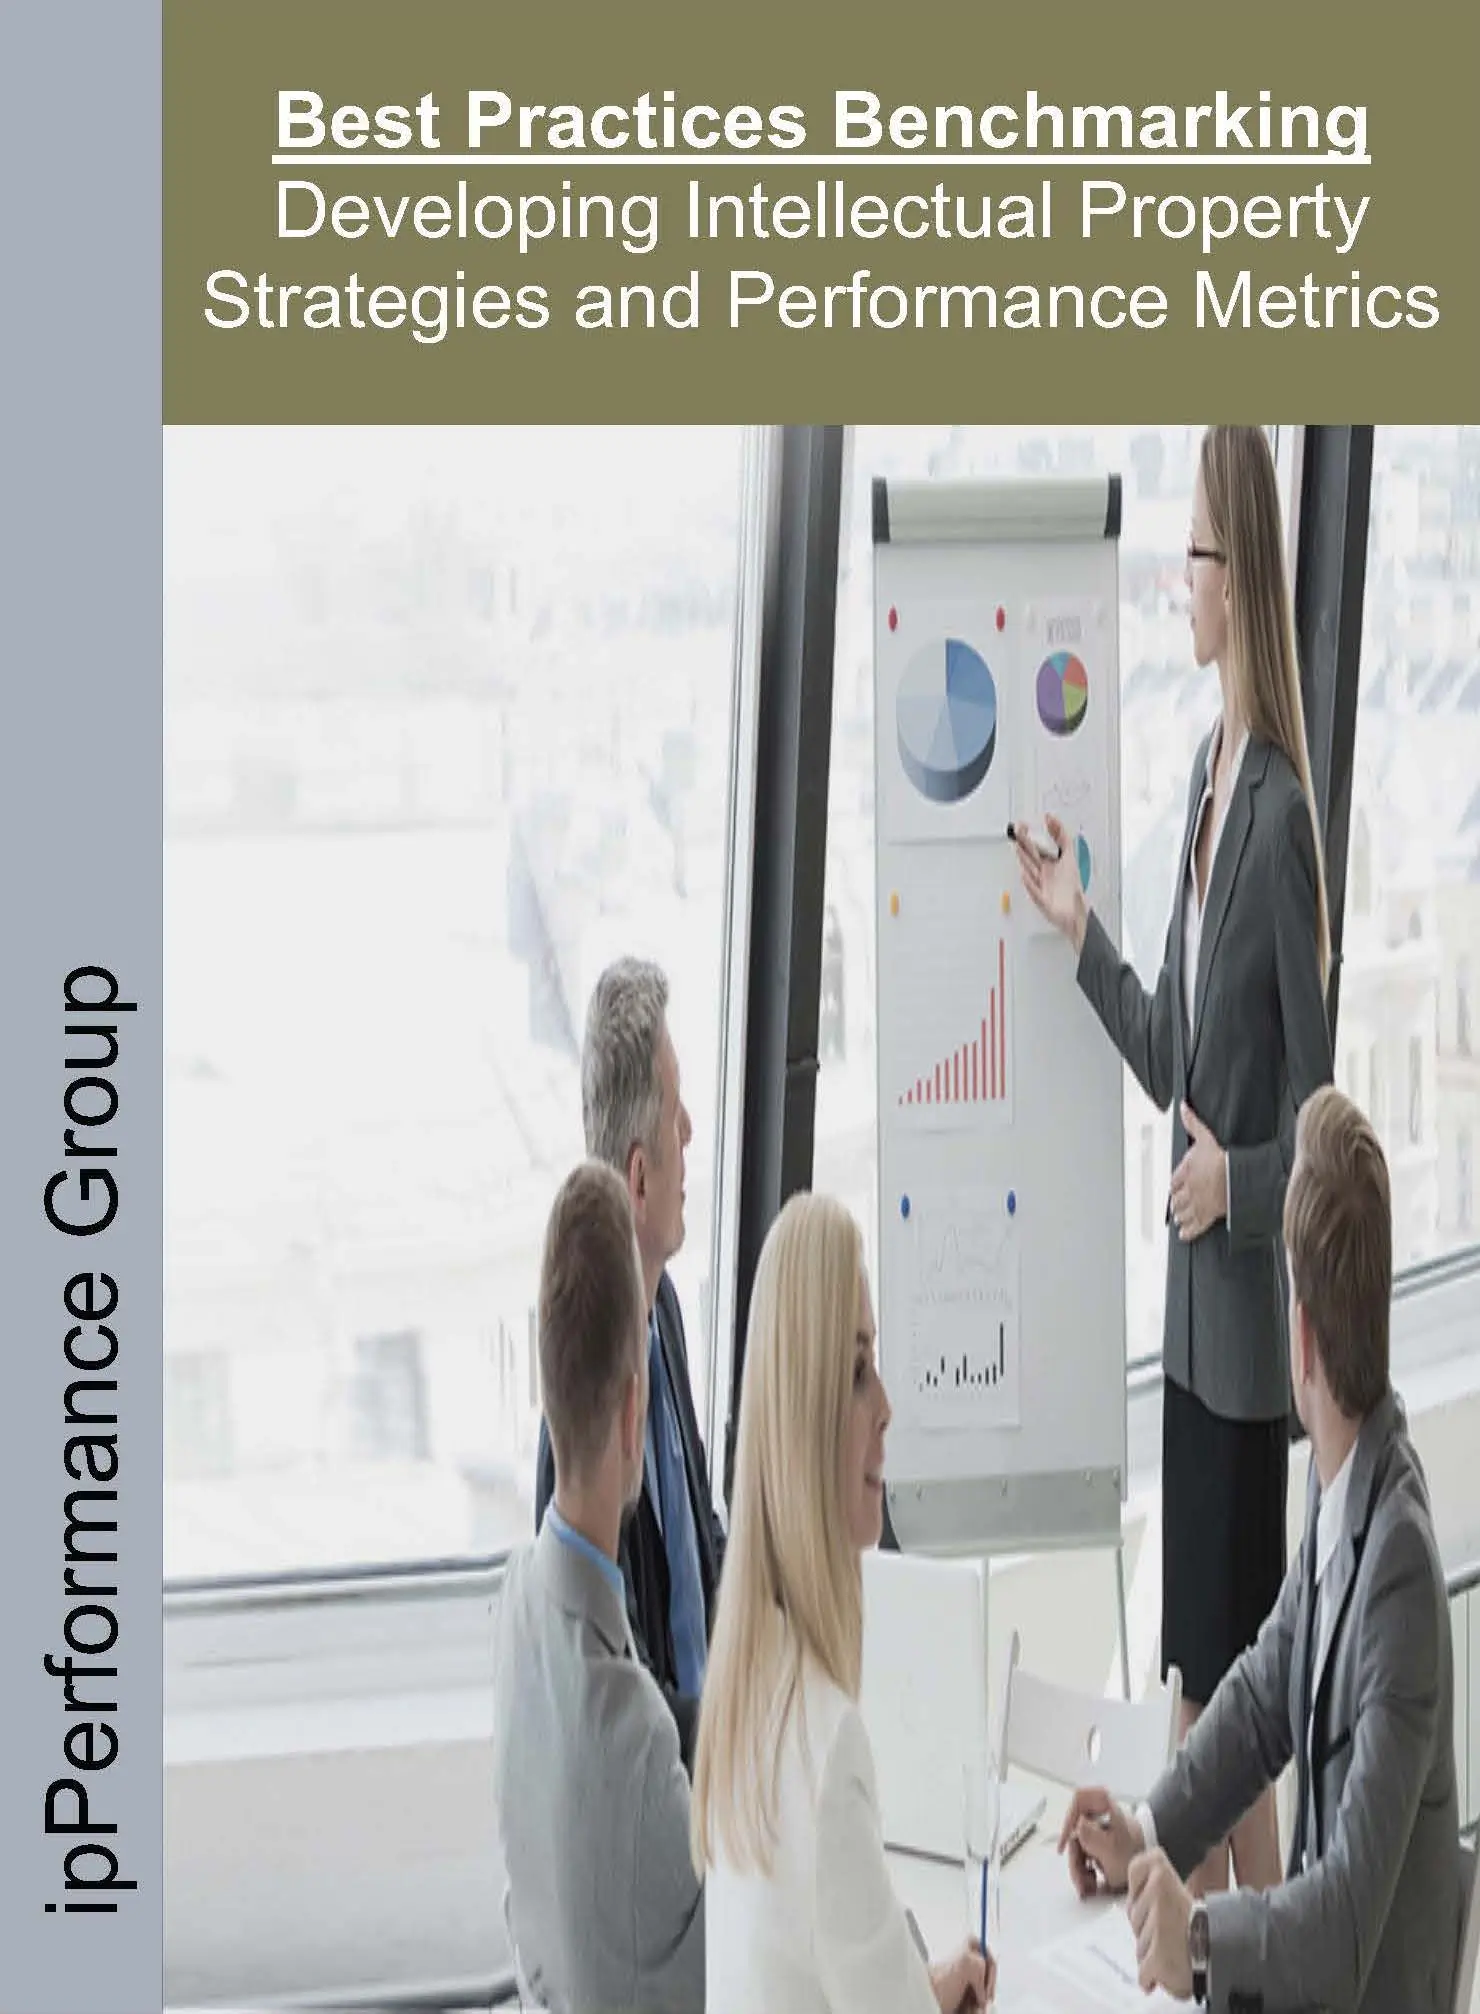 Developing-Intellectual-Property-Strategies-and-Performance-Metrics-Best-Practices-Report